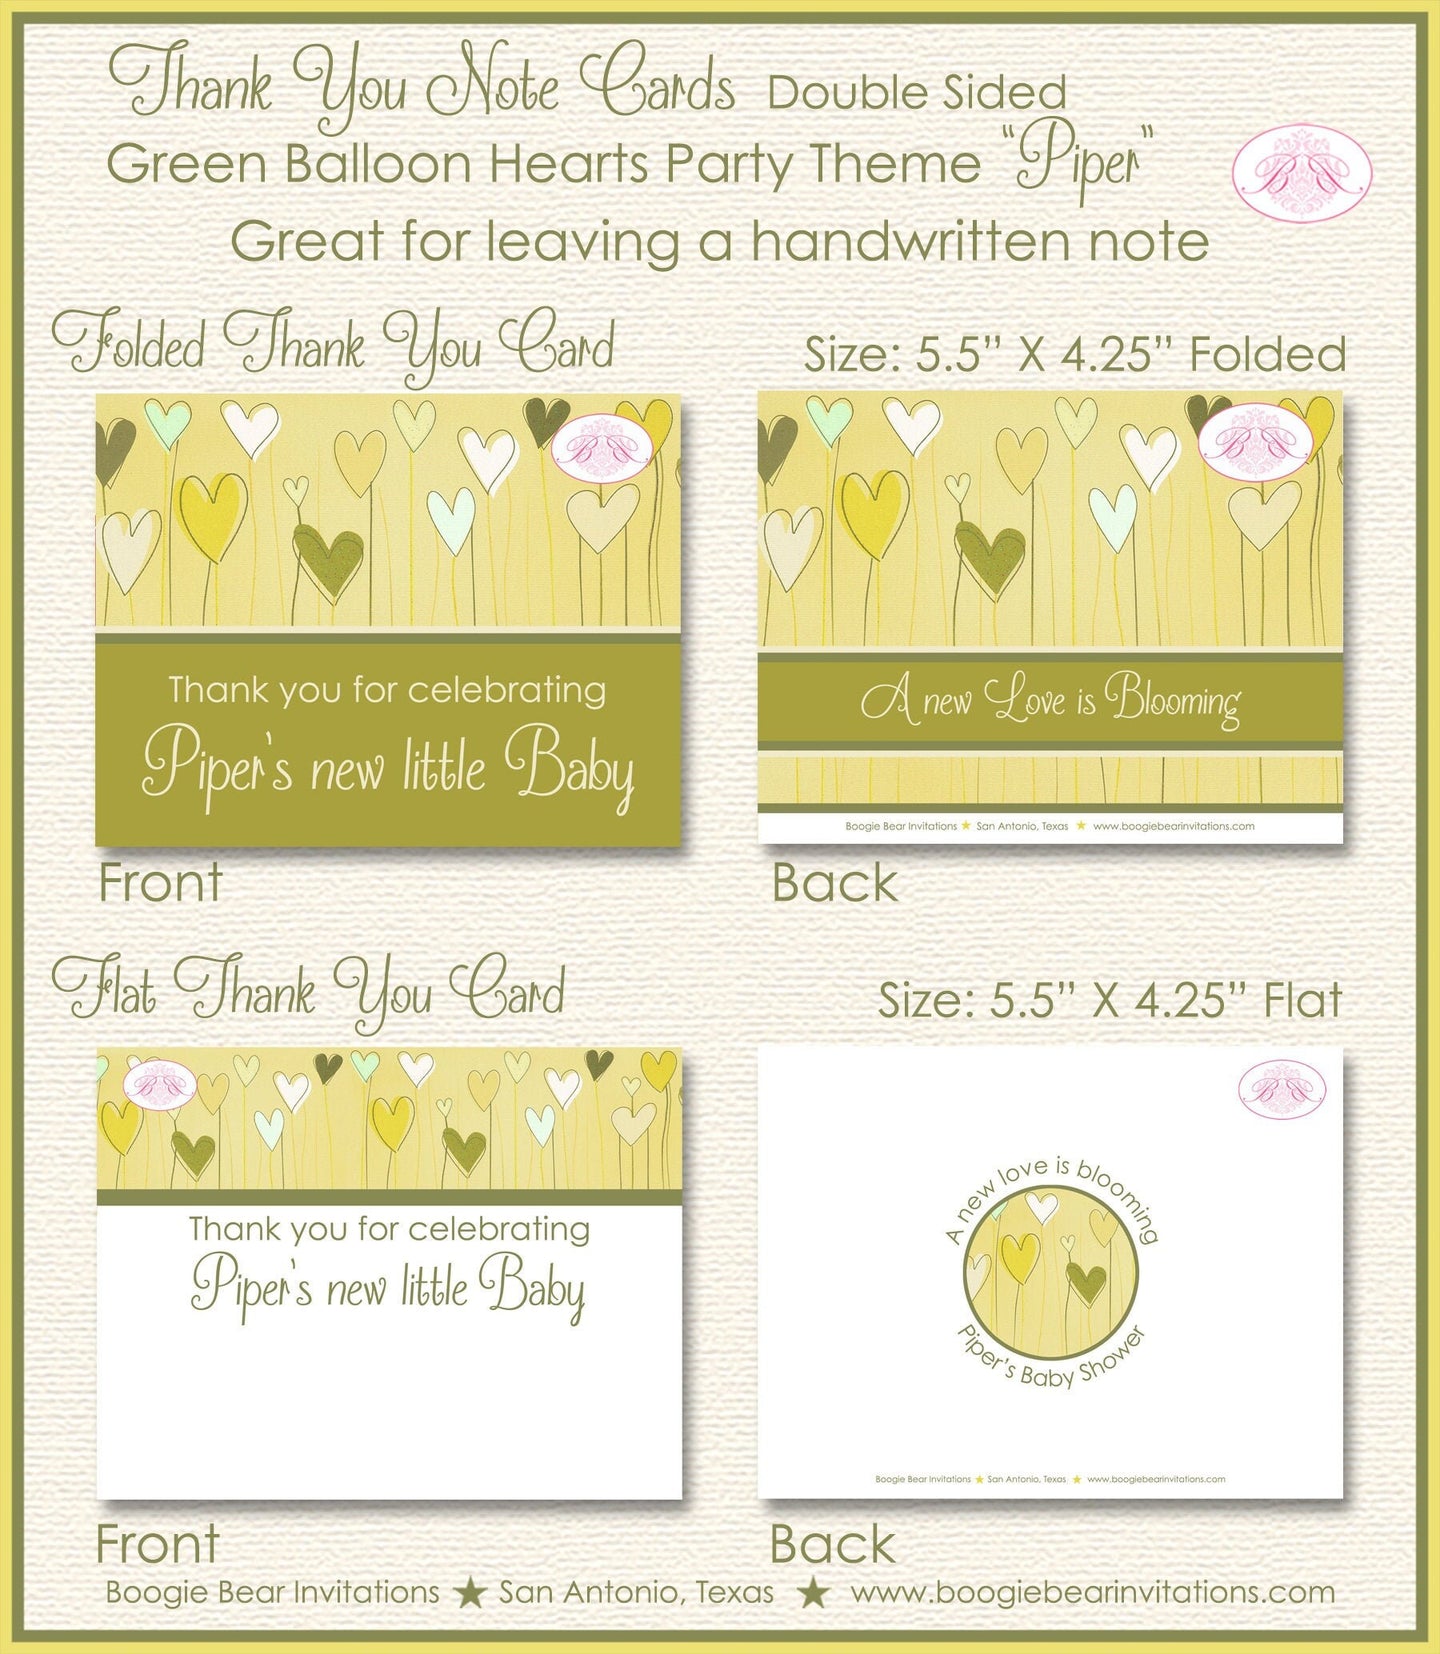 Balloon Hearts Baby Shower Thank You Note Card Party Birthday Green Yellow Neutral Balloon Love Boogie Bear Invitations Piper Theme Printed